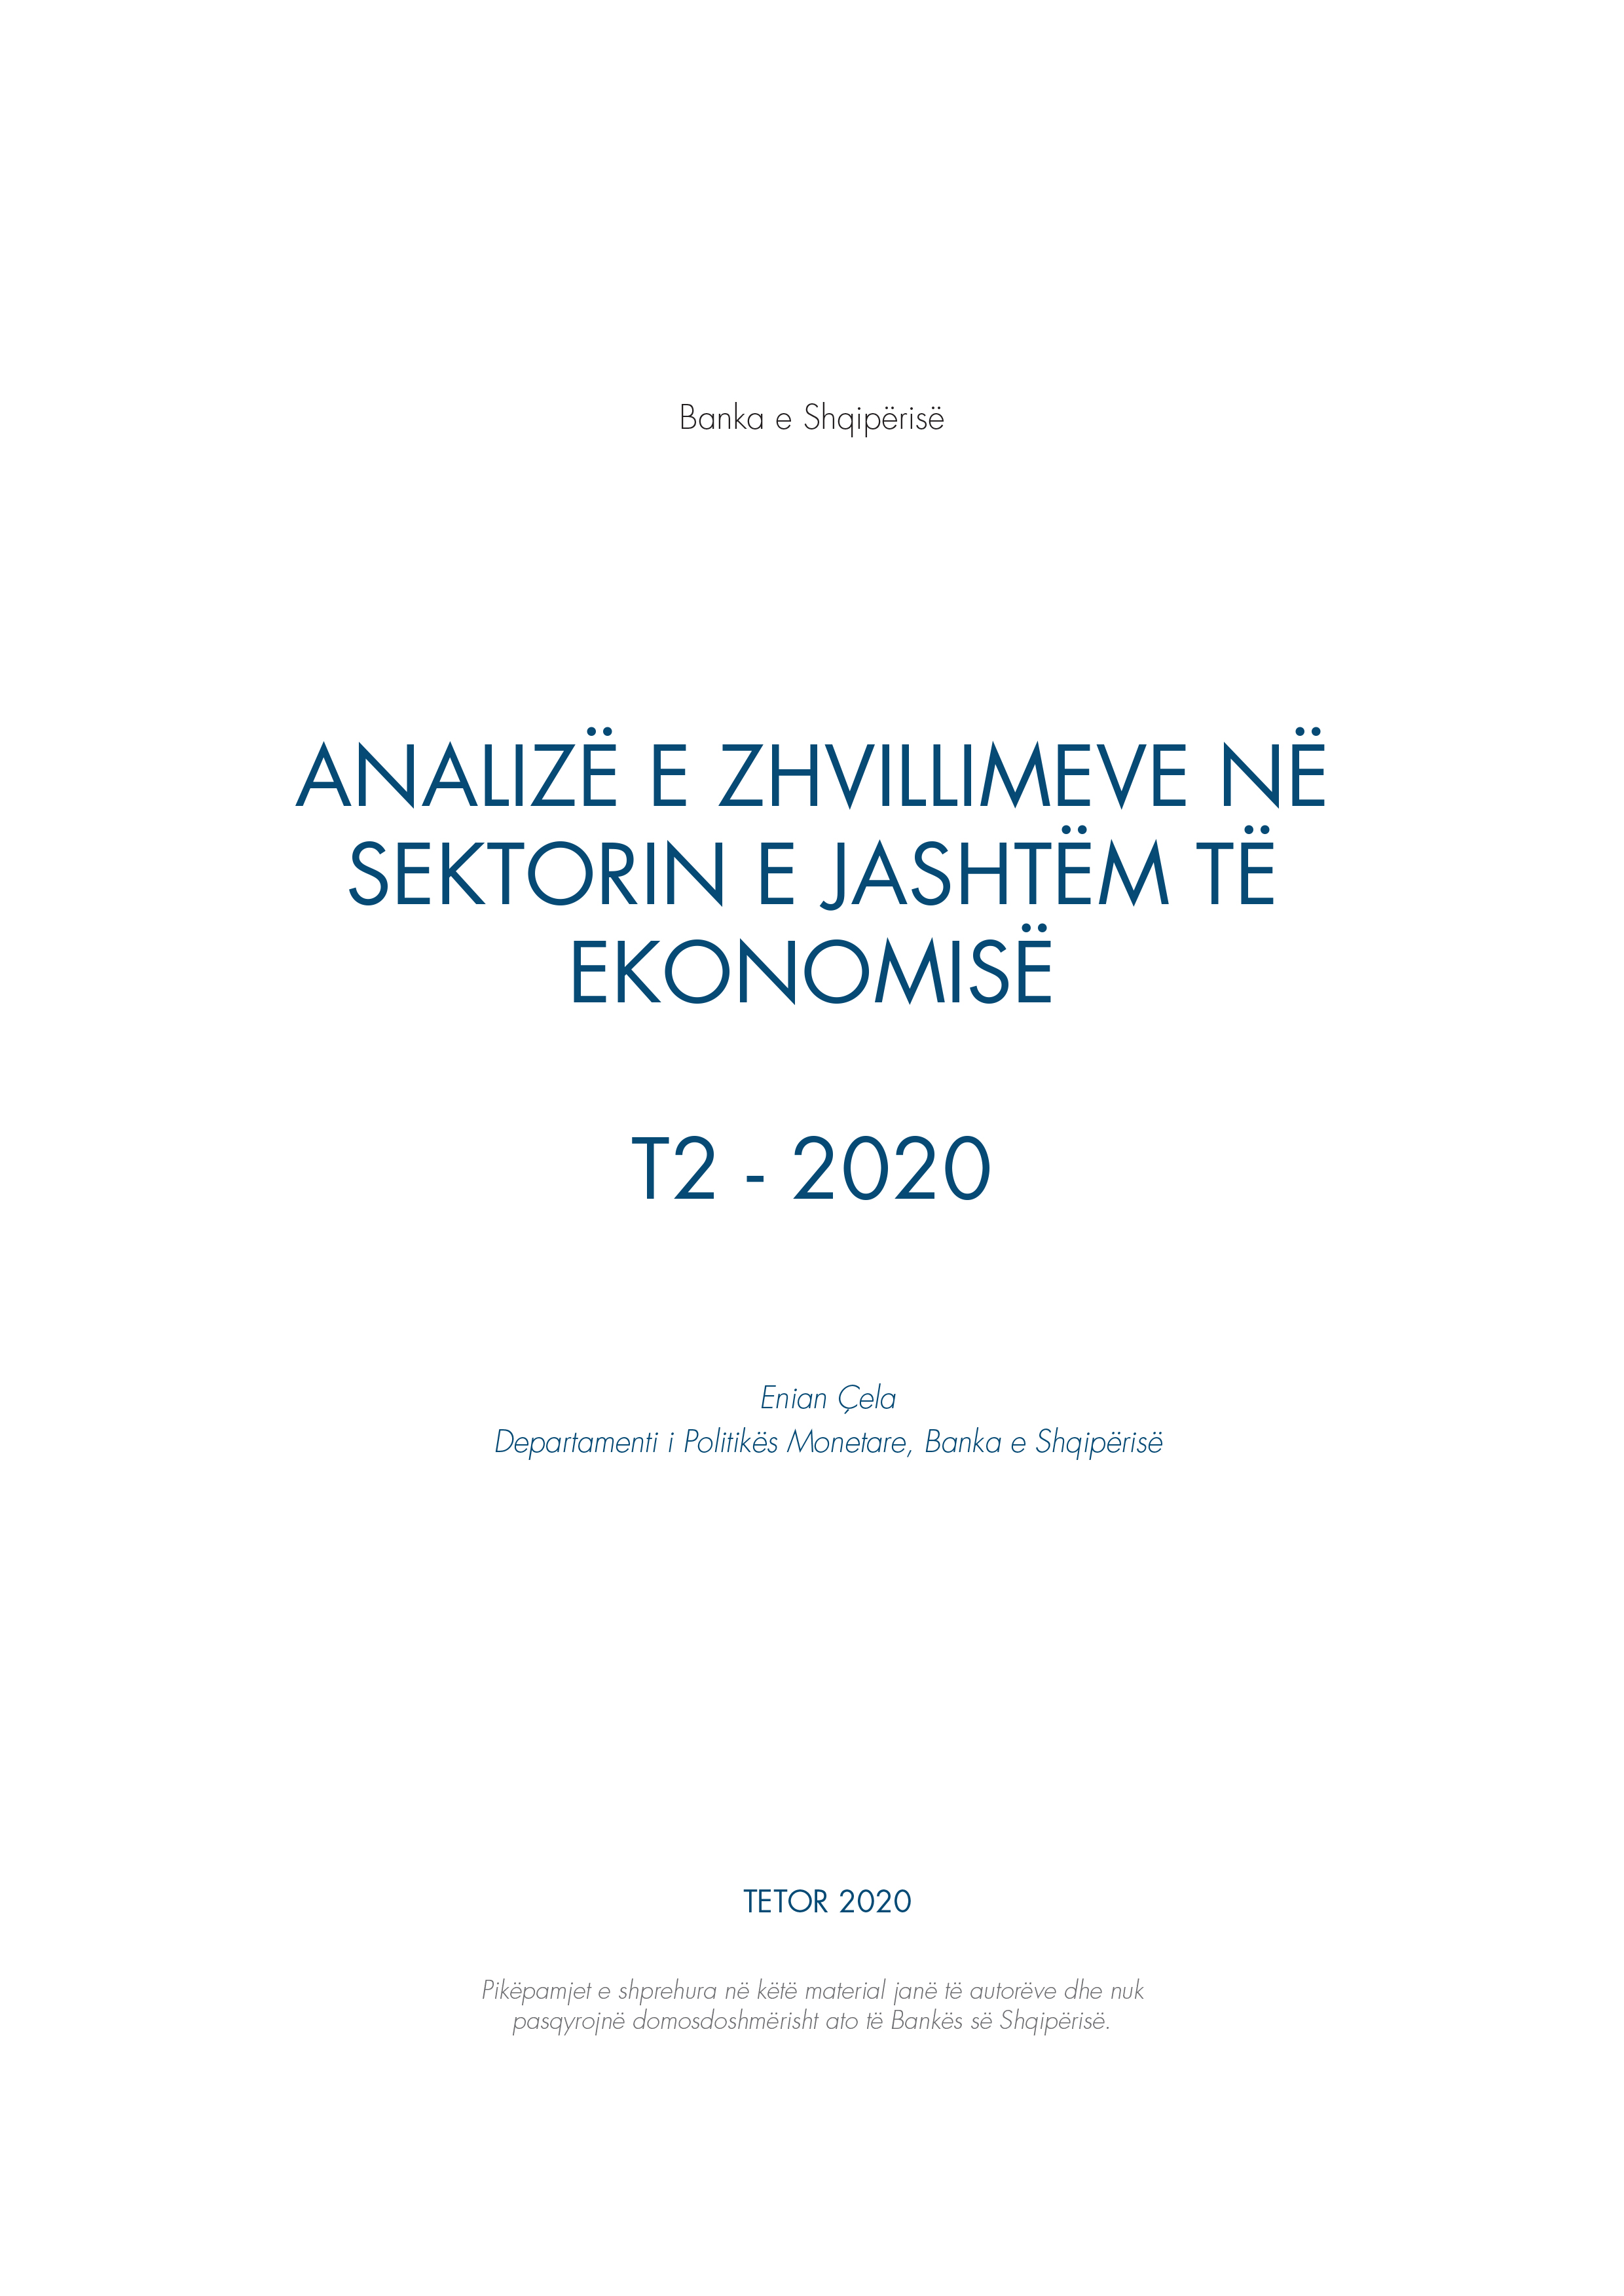 Analysis of developments in the external sector of the economy 2020 Q2